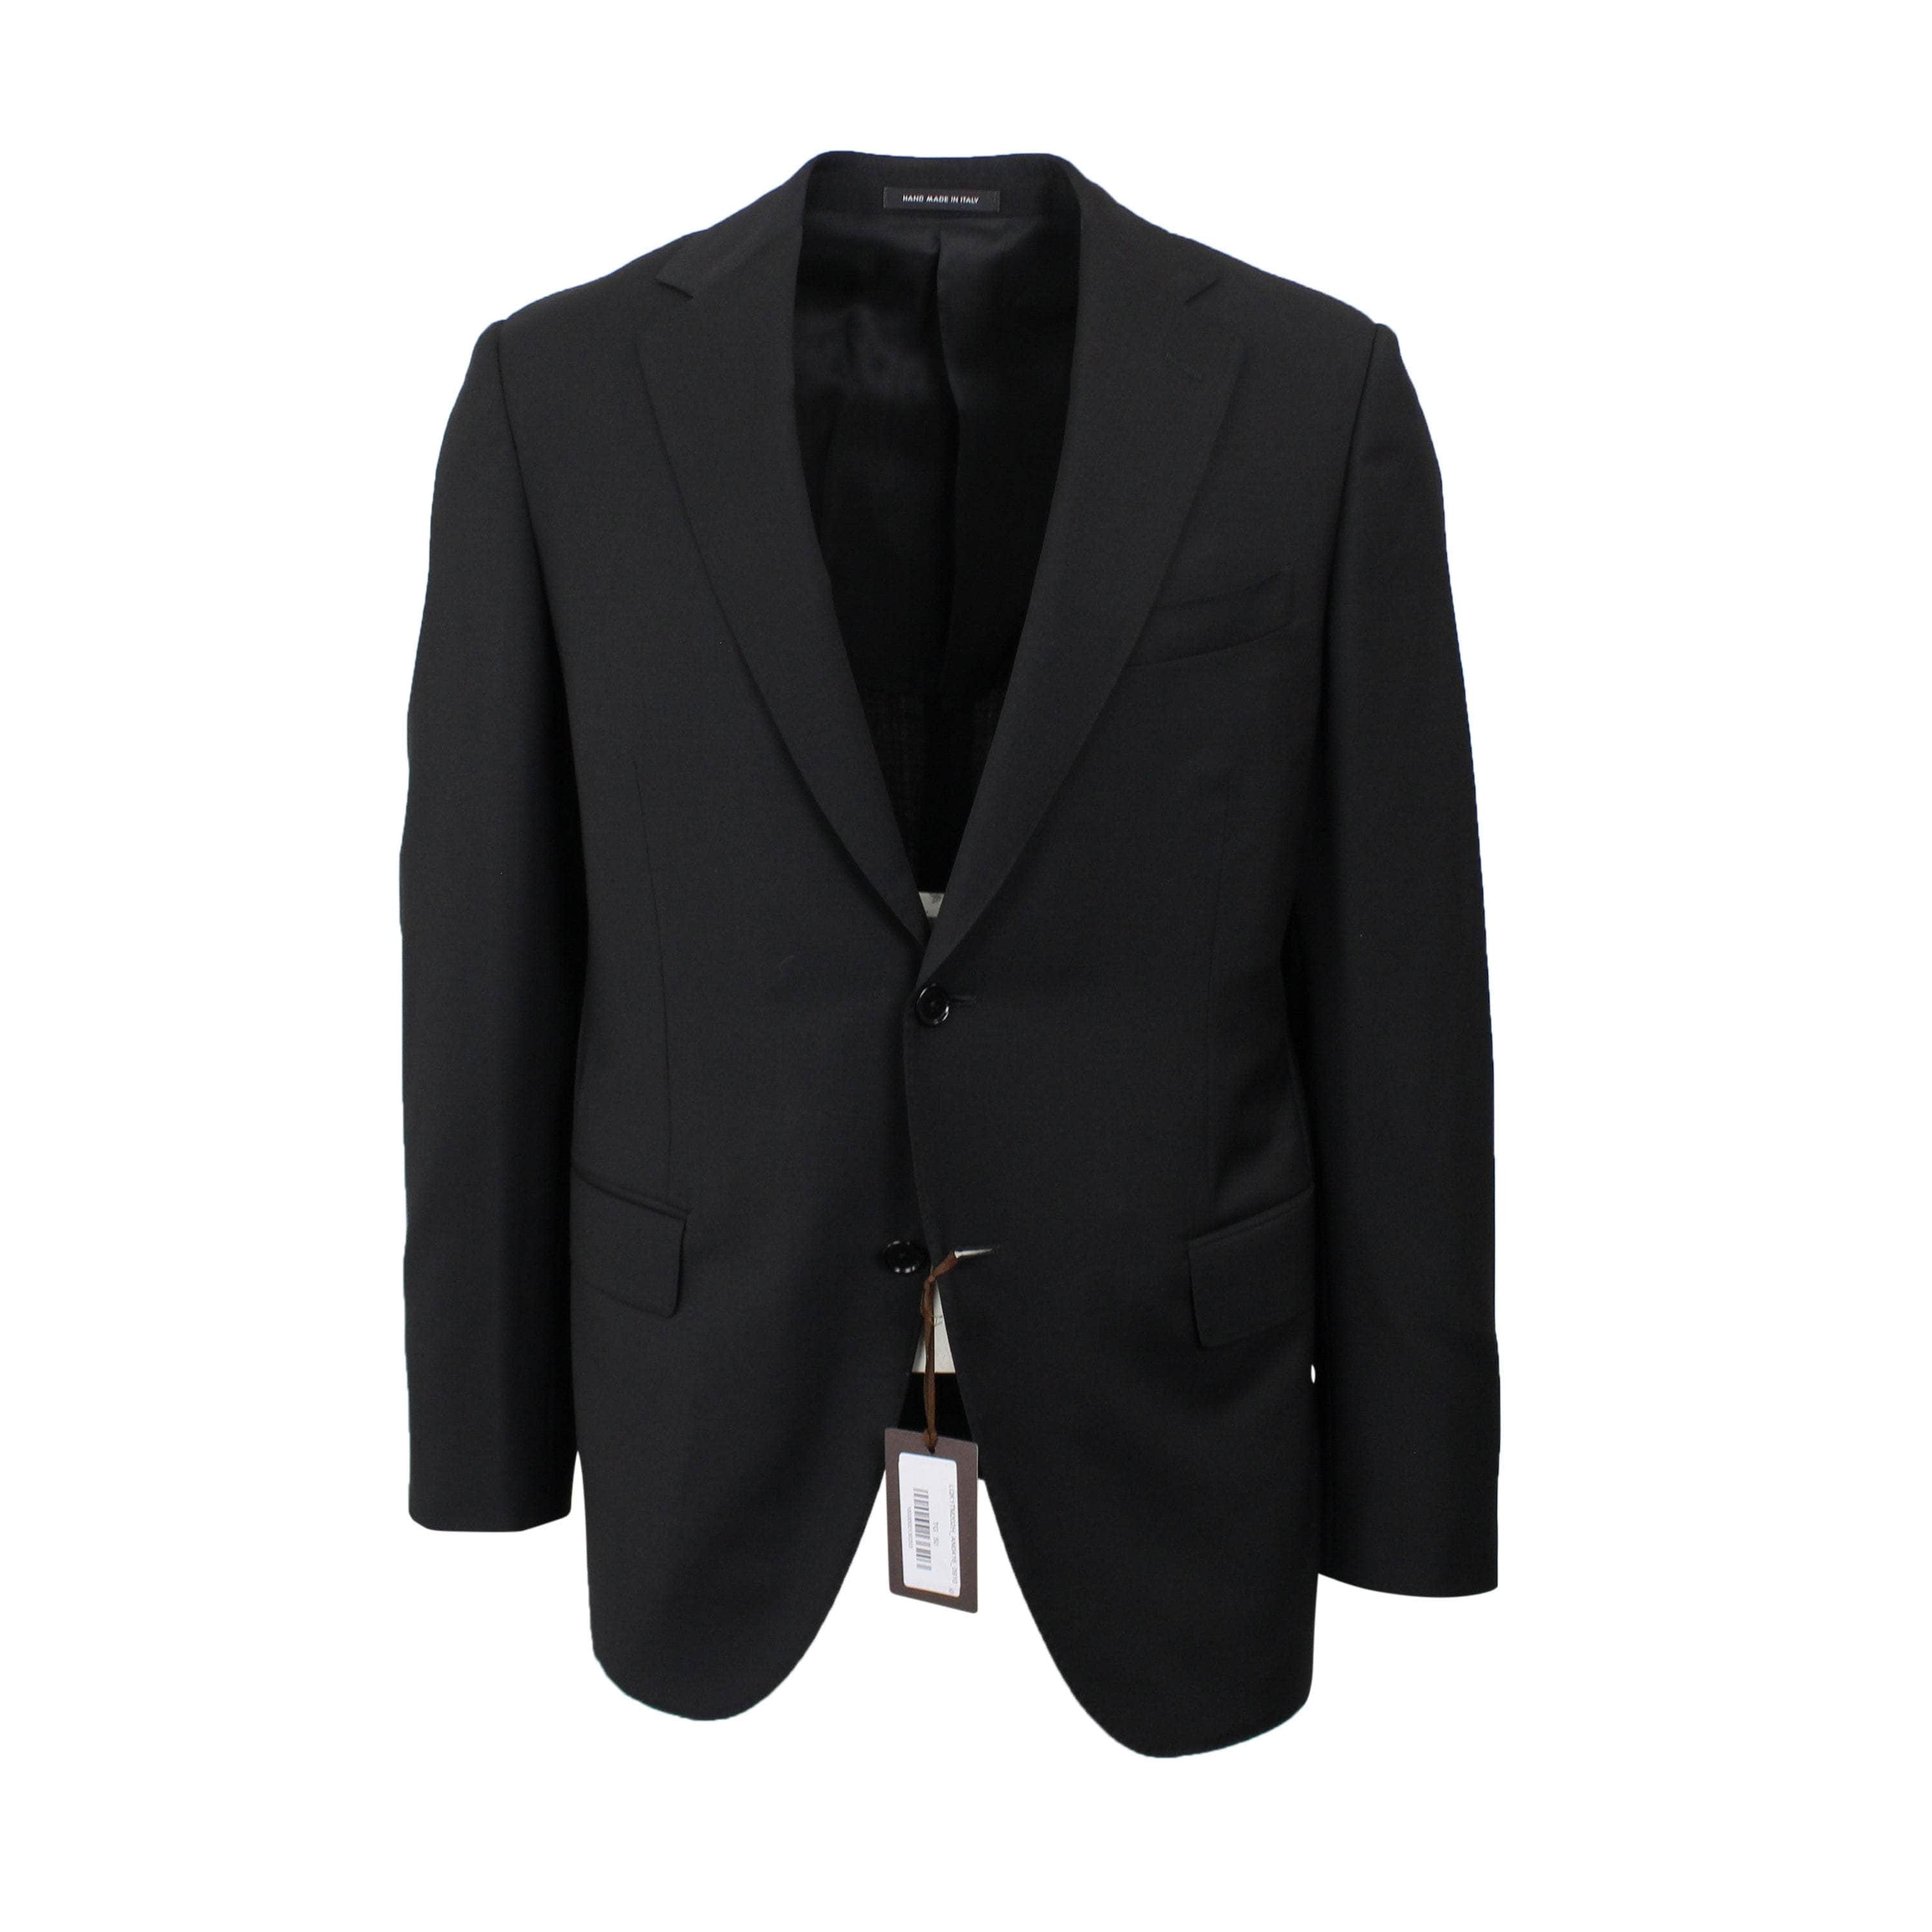 Caruso 500-750, caruso, channelenable-all, chicmi, couponcollection, main-clothing, shop375, size-50, Stadium Goods, stadiumgoods 50 Black Single Breasted Wool Suit 8R CRS-XTPS-0189/50 CRS-XTPS-0189/50